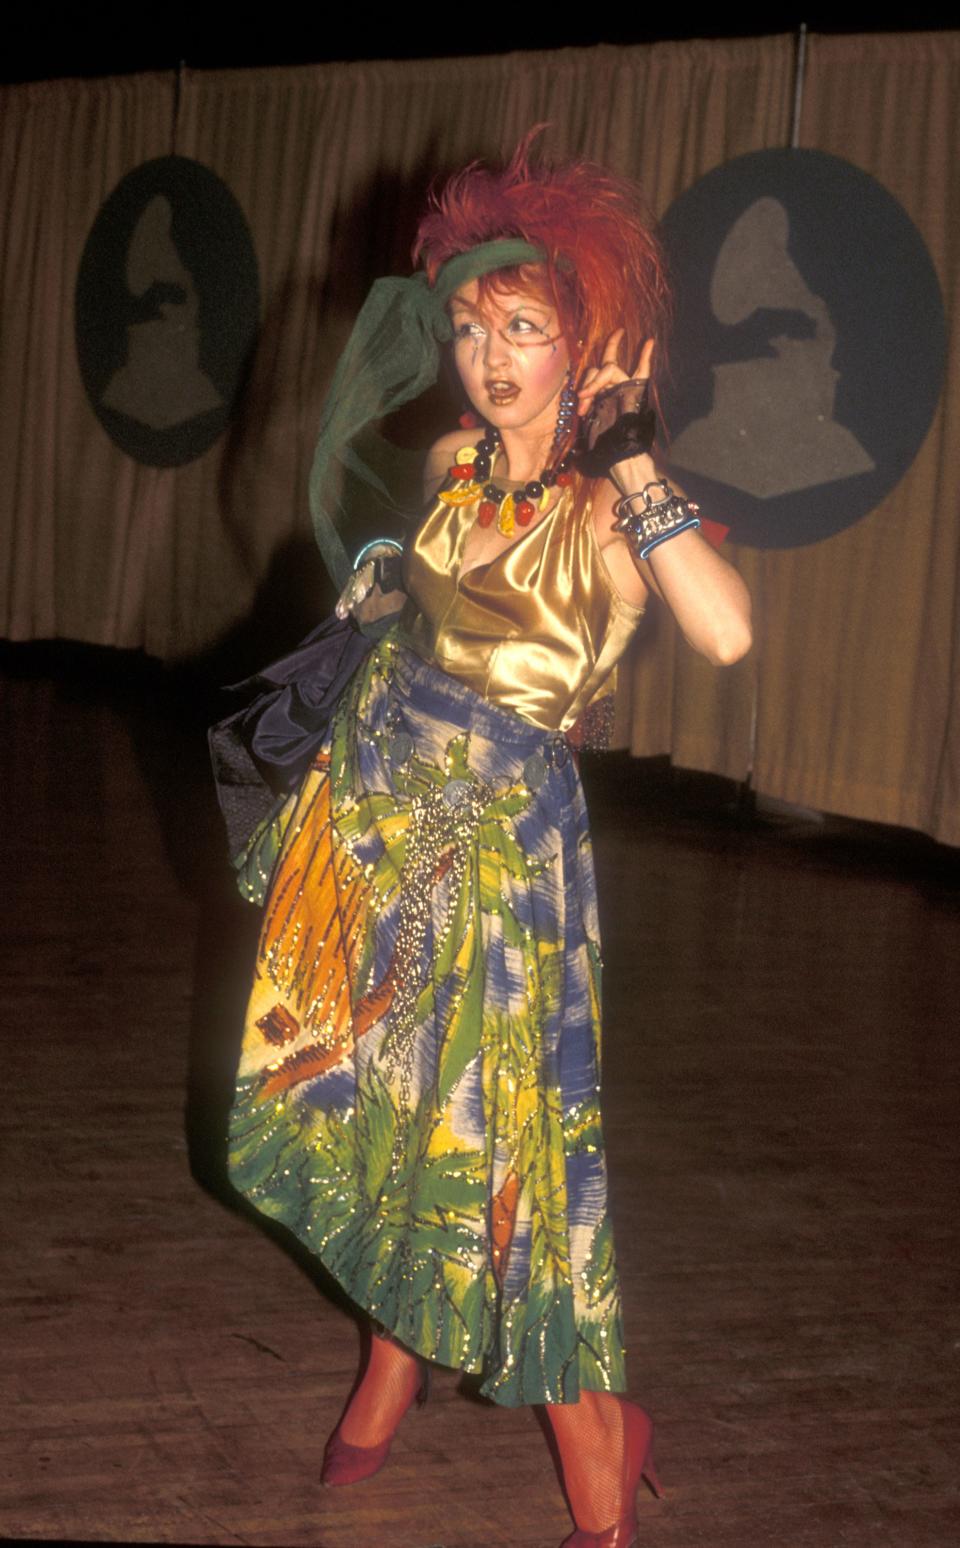 Back in 1984, before Lady Gaga was here to bless us, Cyndi Lauper was making headlines at every awards show with her out-there fashion looks, and the Grammy Awards that year were no exception. Lauper's tropical vacation gown completely fit her personal, outrageous style, and we truly <em>loved</em> to see it.